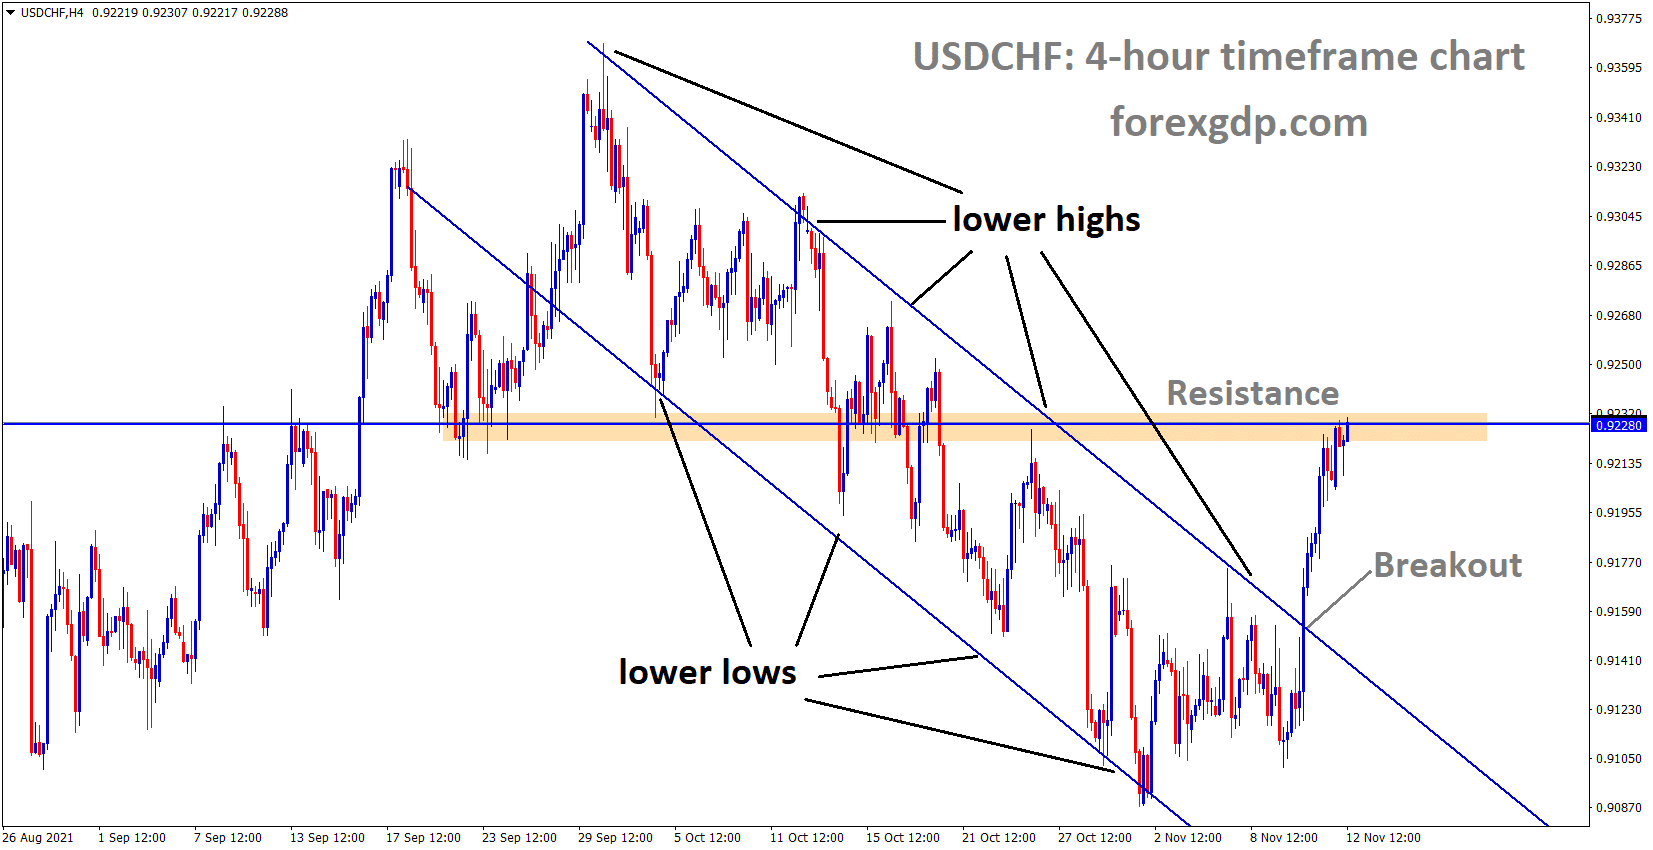 USDCHF has broken the Descending channel and reached the previous resistance area